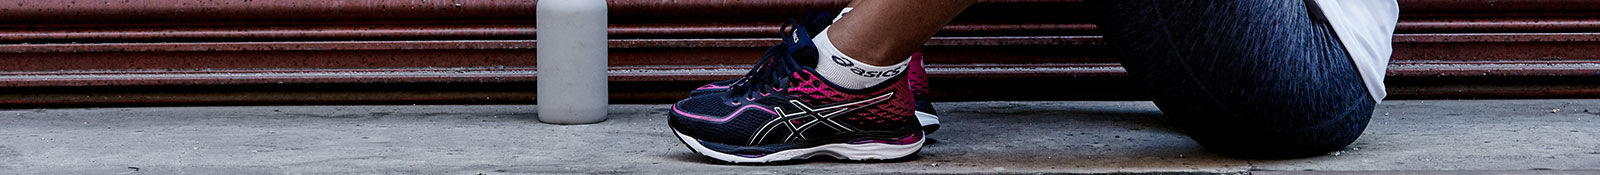 When To Replace Your Running Shoes Asics